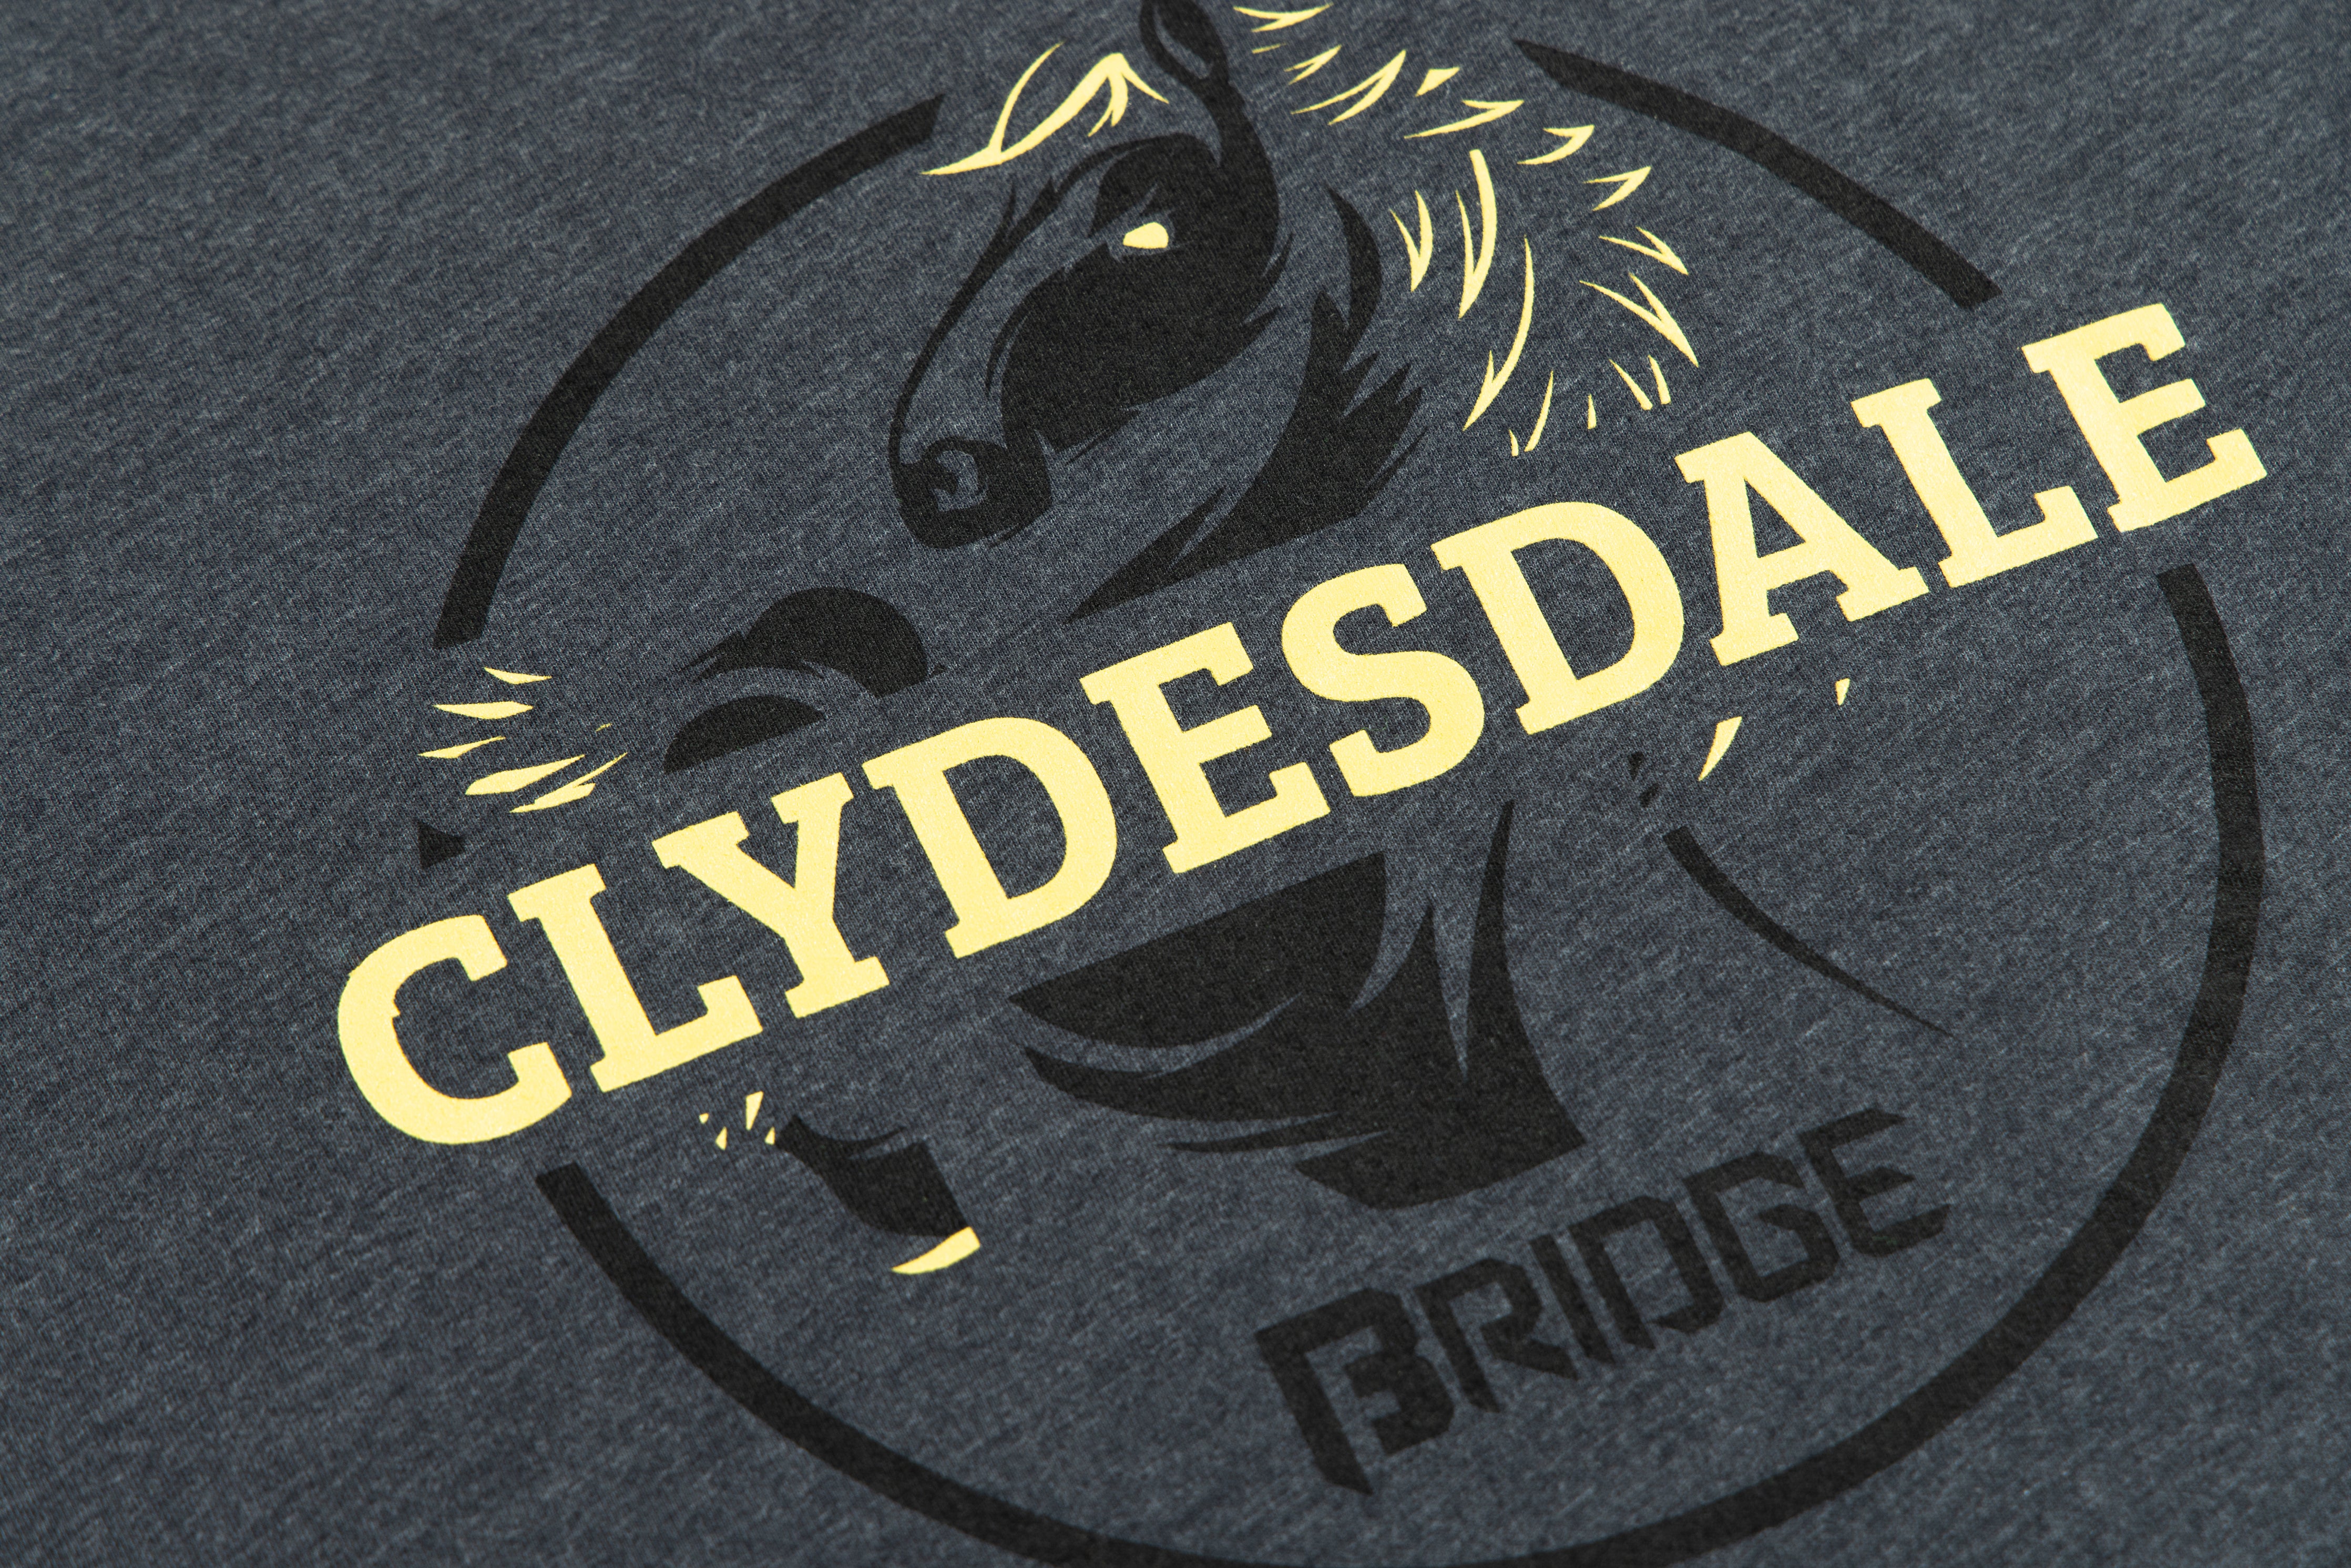 Clydesdale Tee